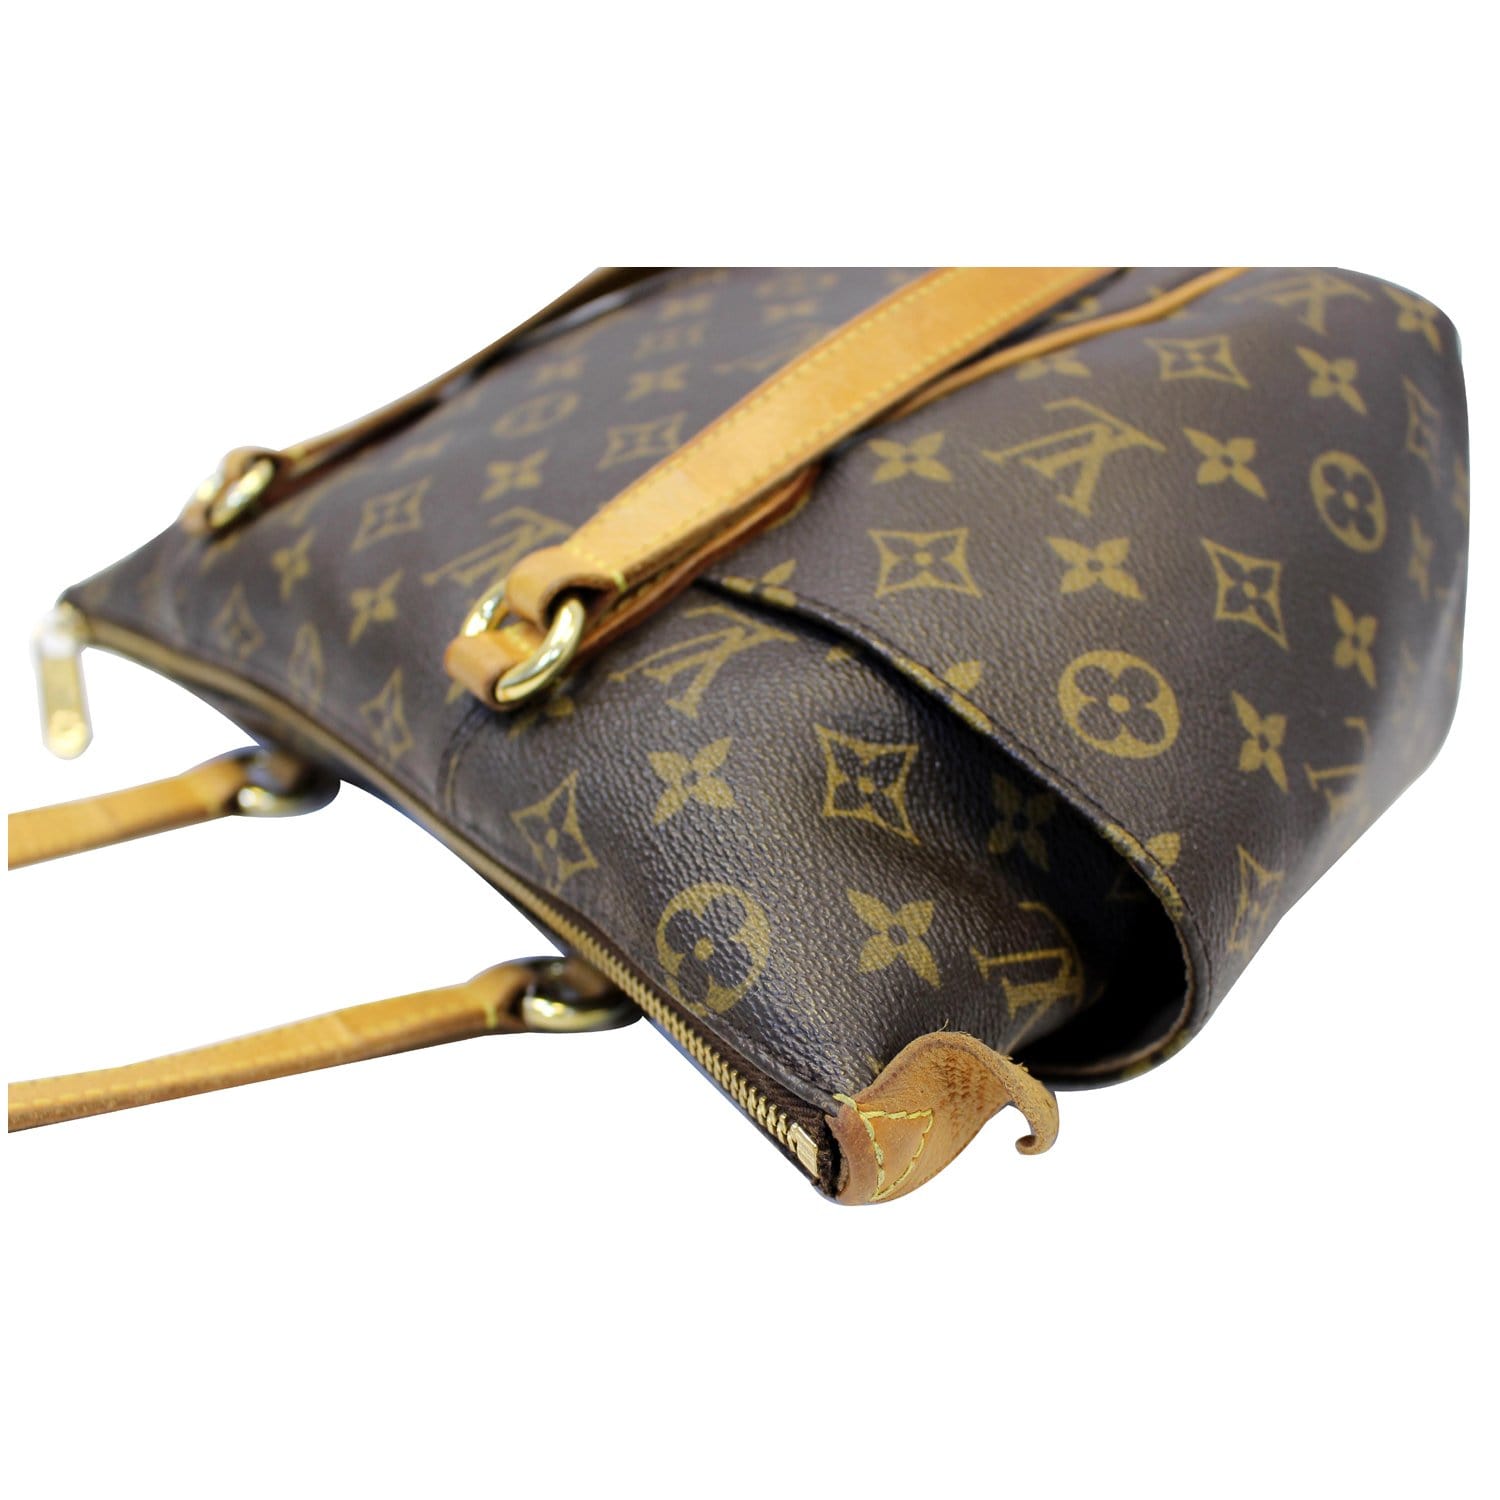 Auth Louis Vuitton Monogram Totally PM Tote Bag Brown M56688 Used